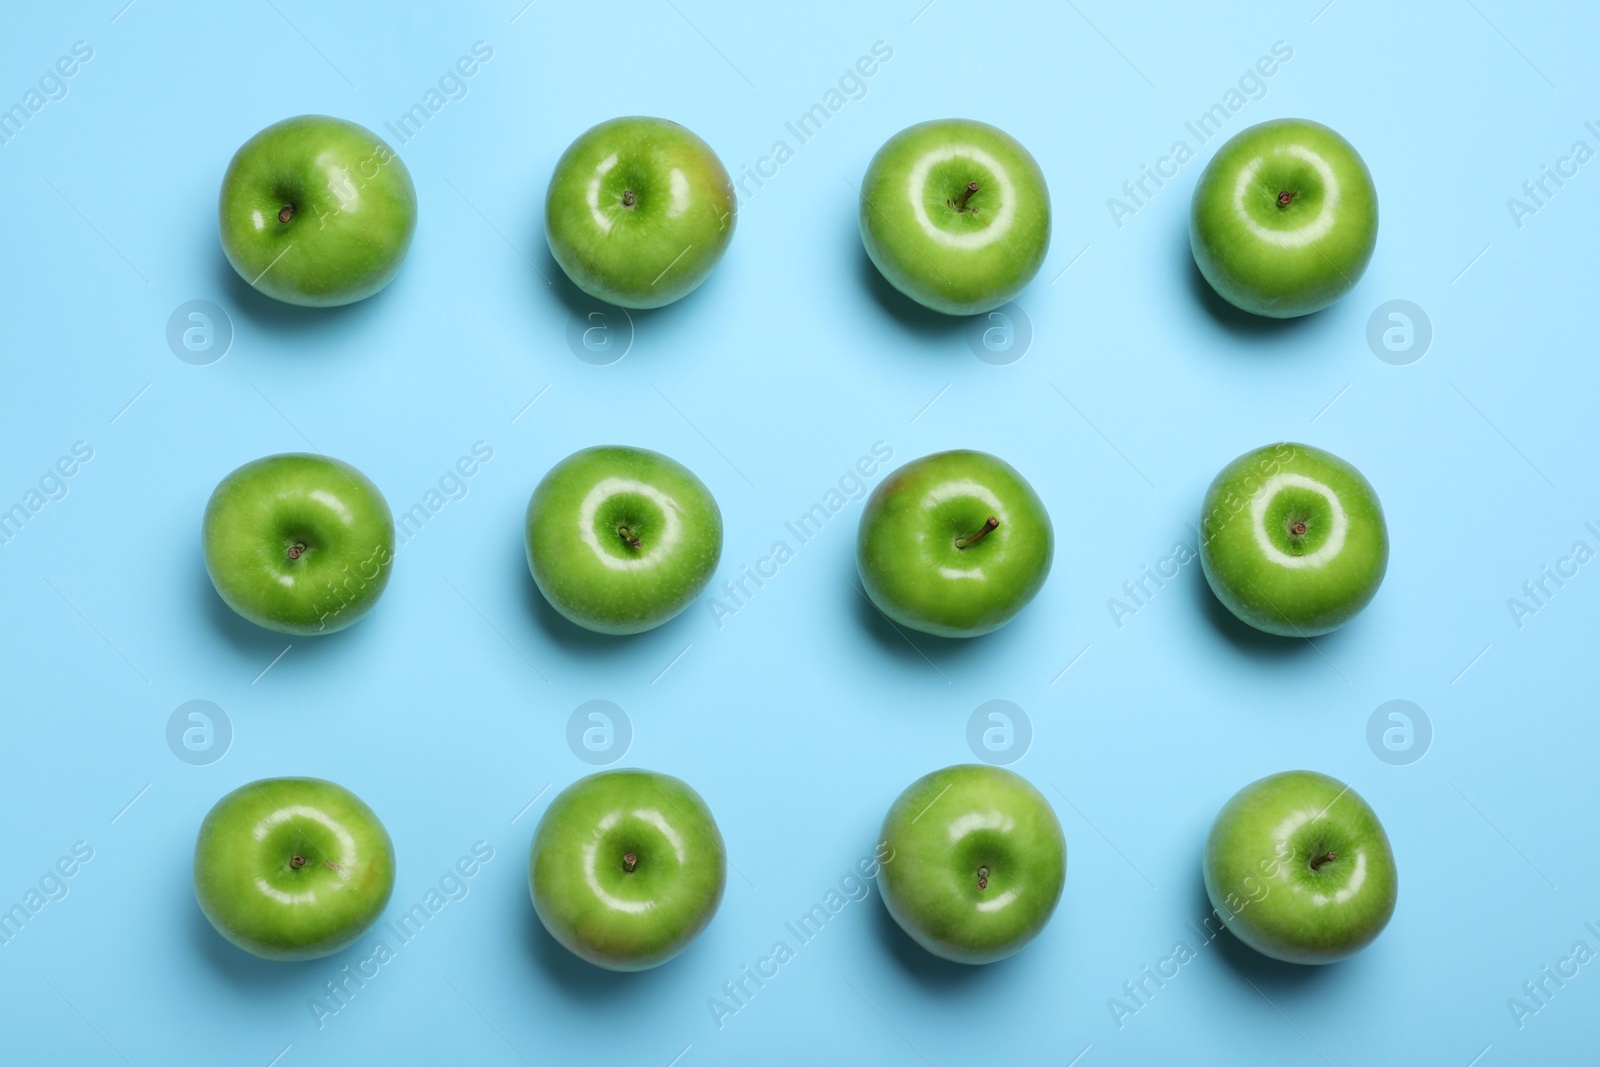 Photo of Tasty green apples on light blue background, flat lay